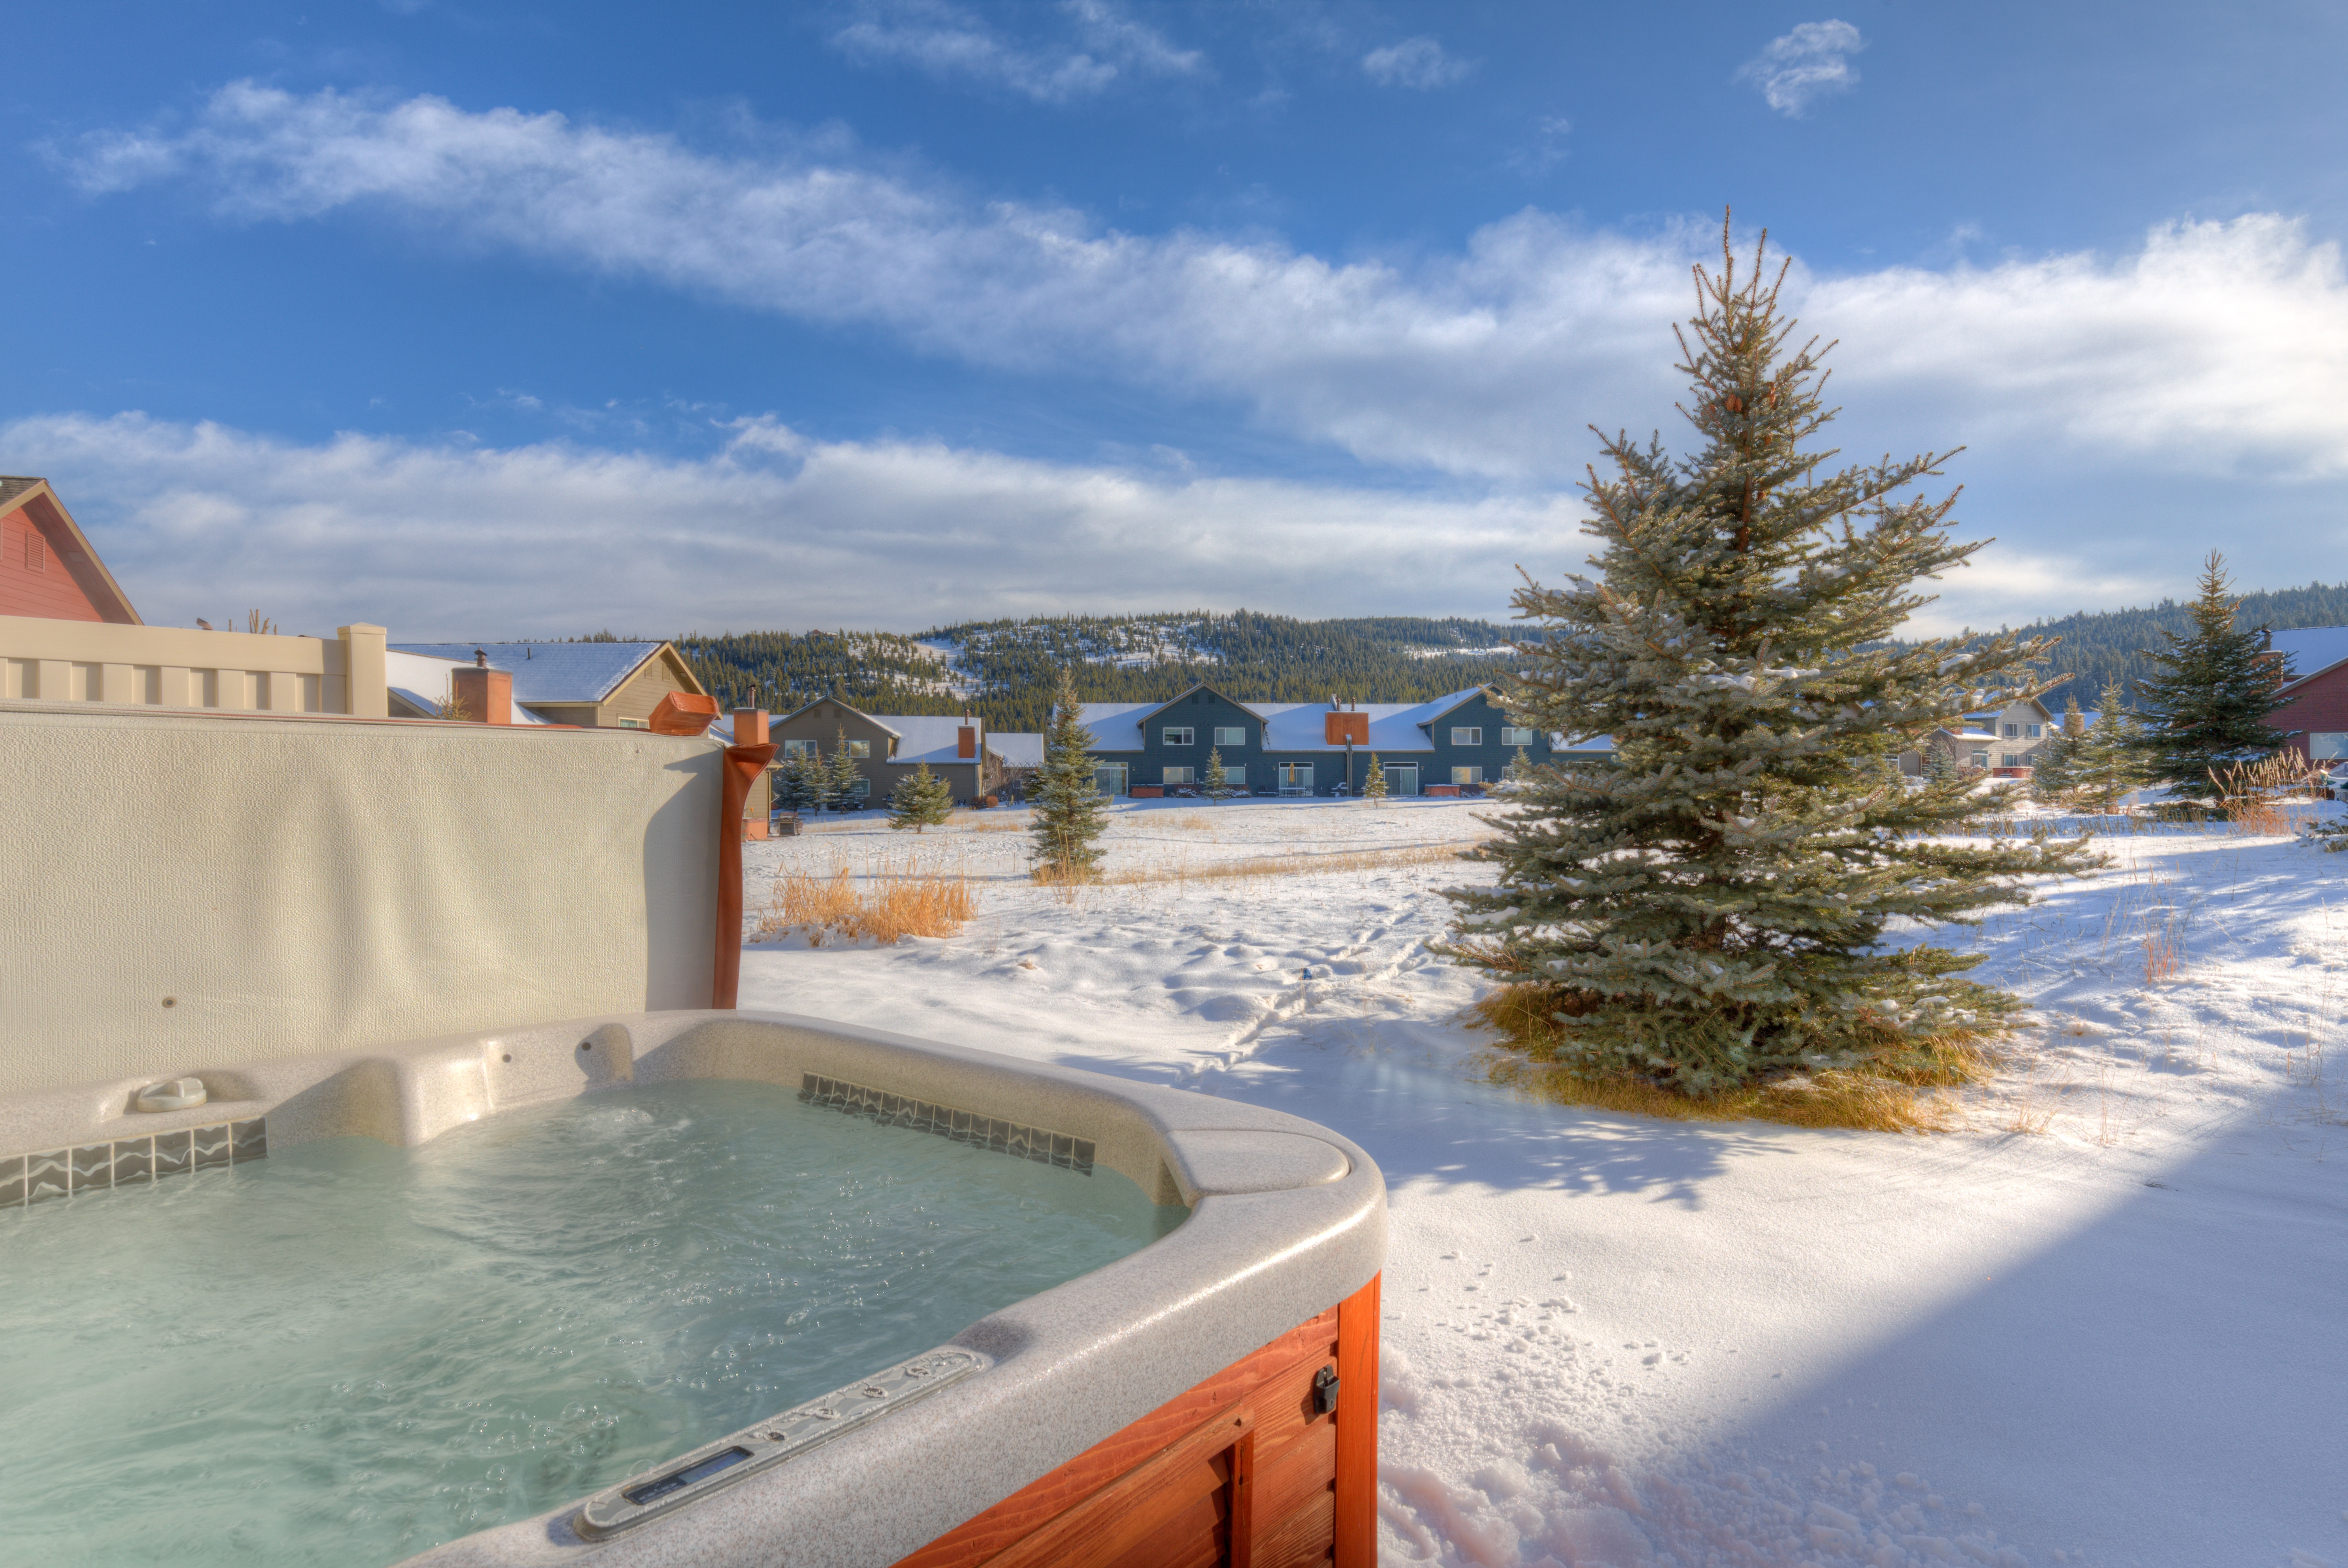 Relax in the hot tub after skiing | Exterior